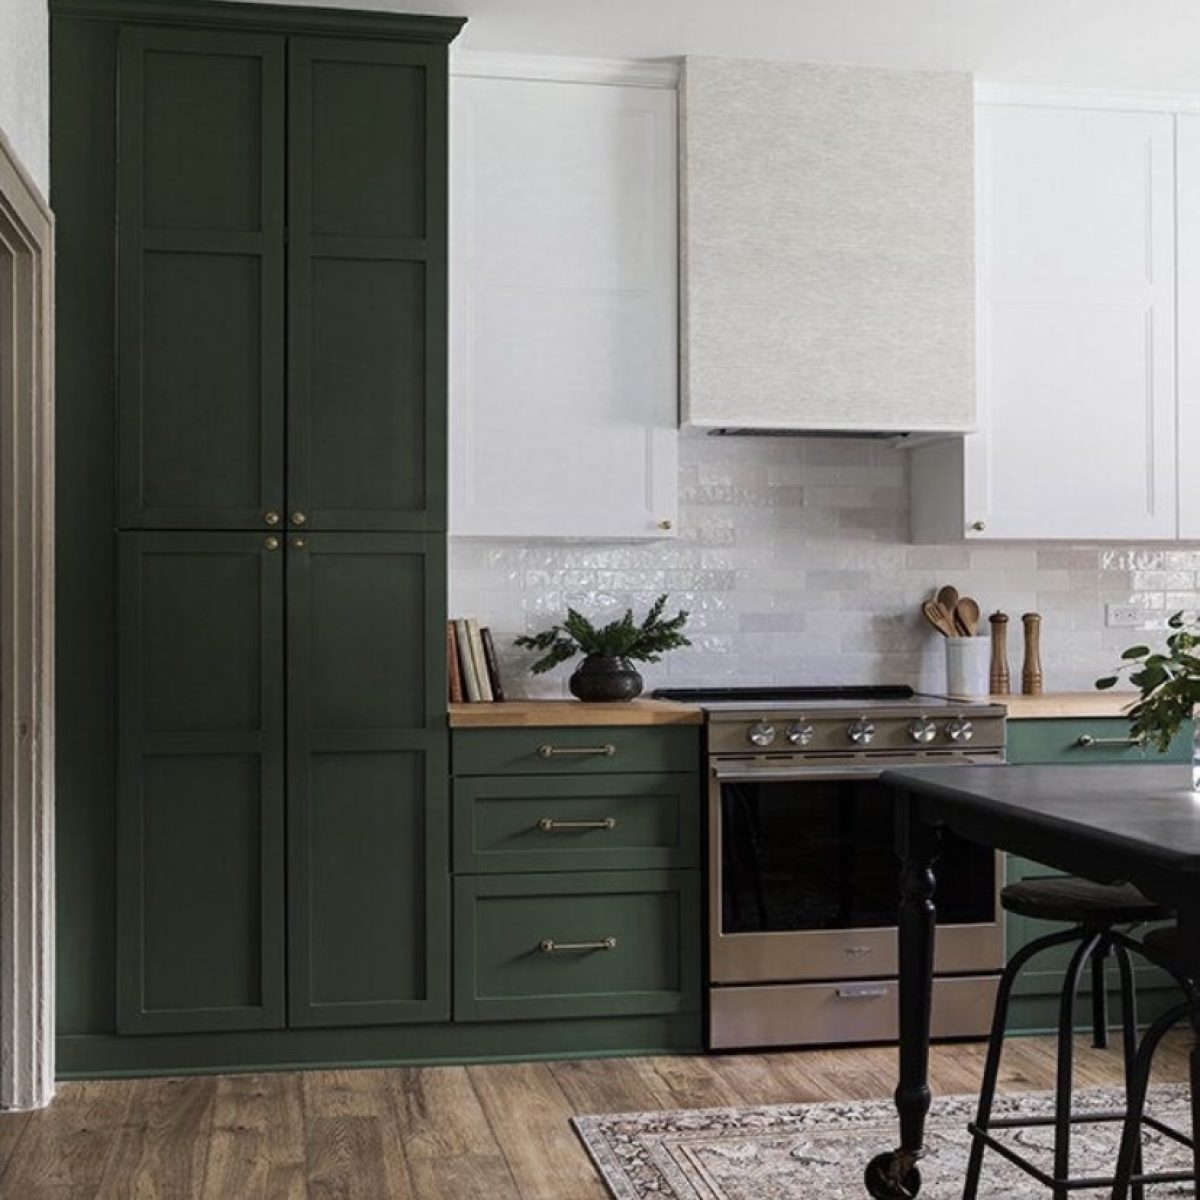 Green Kitchen Cabinets: Can They Go Out of Style?